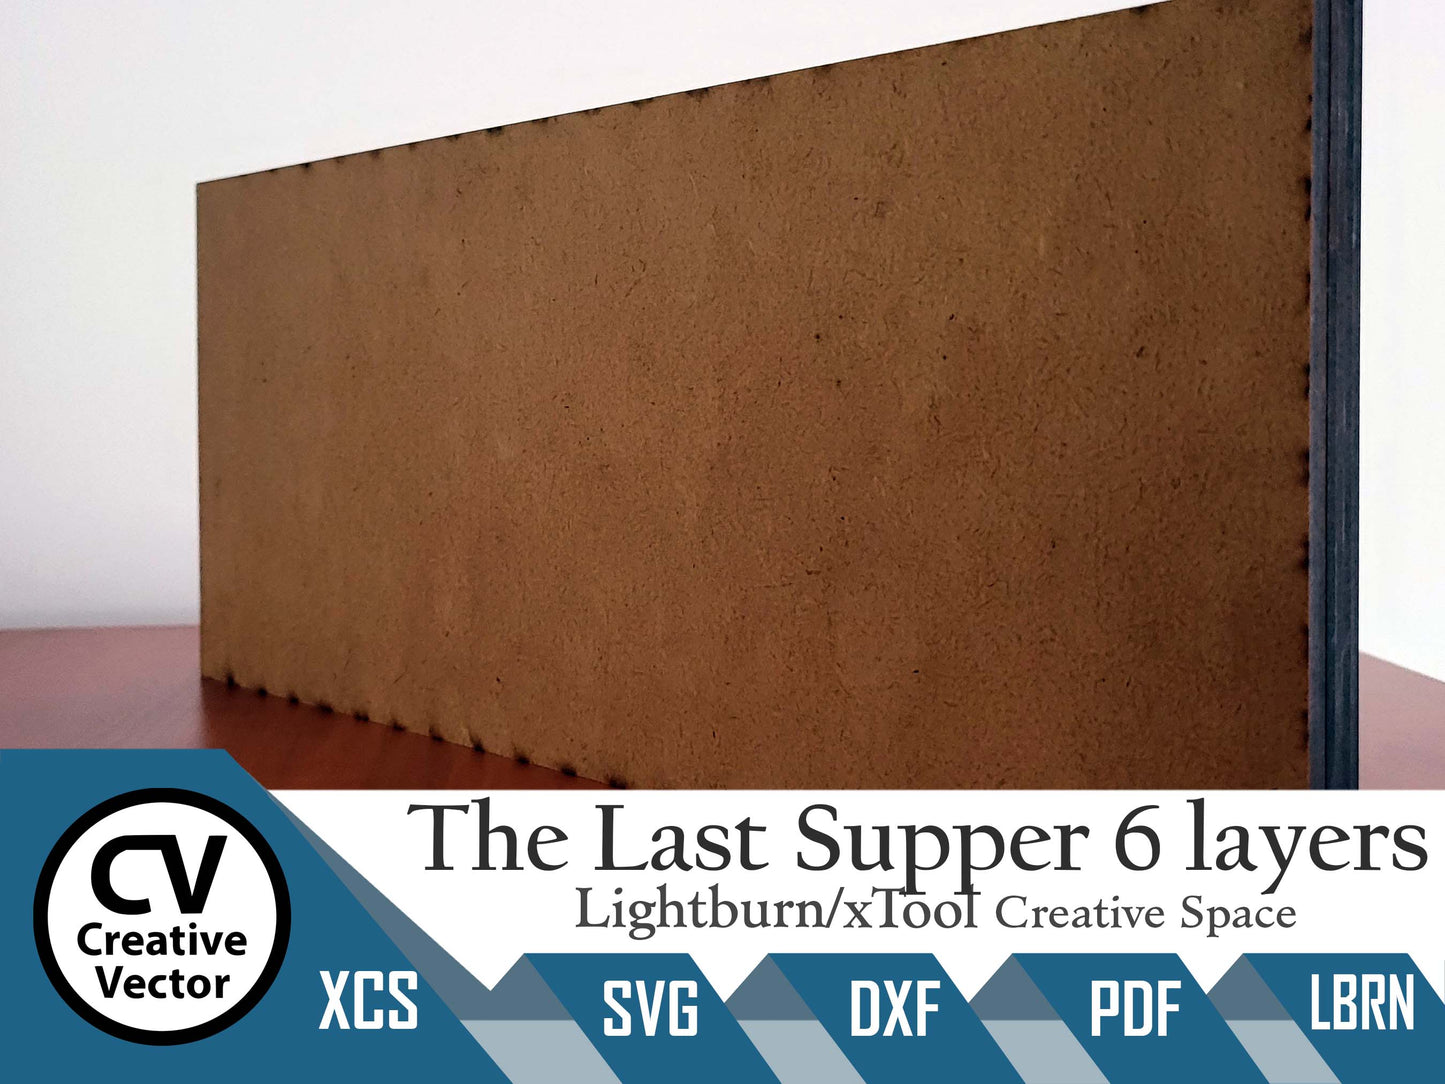 The Last Supper 6 layers